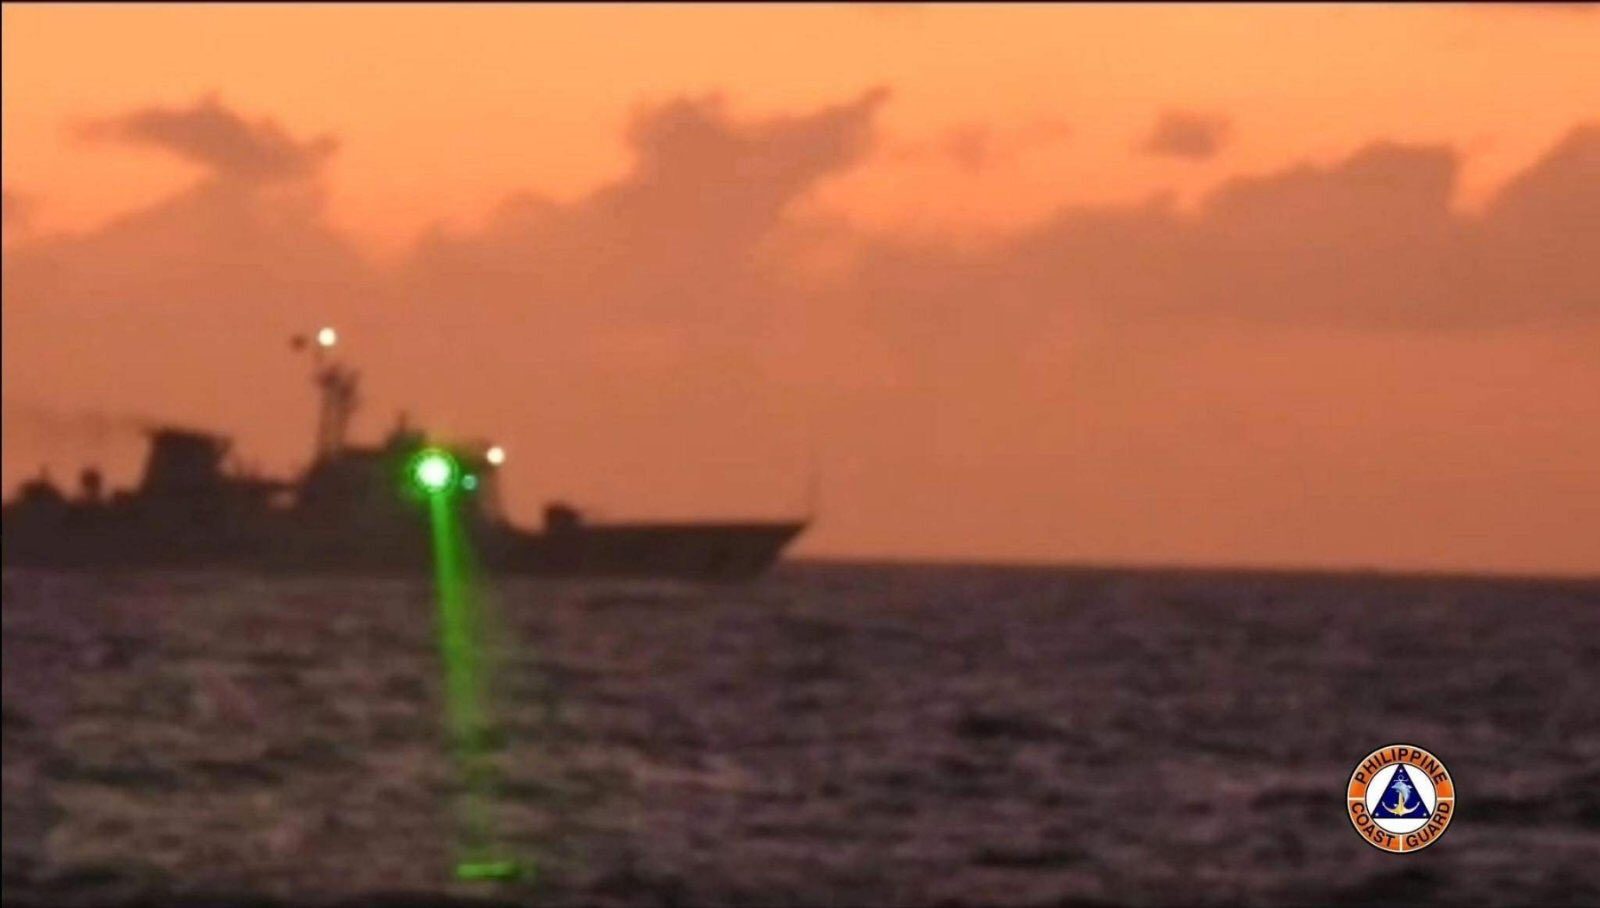 China aims laser at Philippine Coast Guard ship in West PH Sea